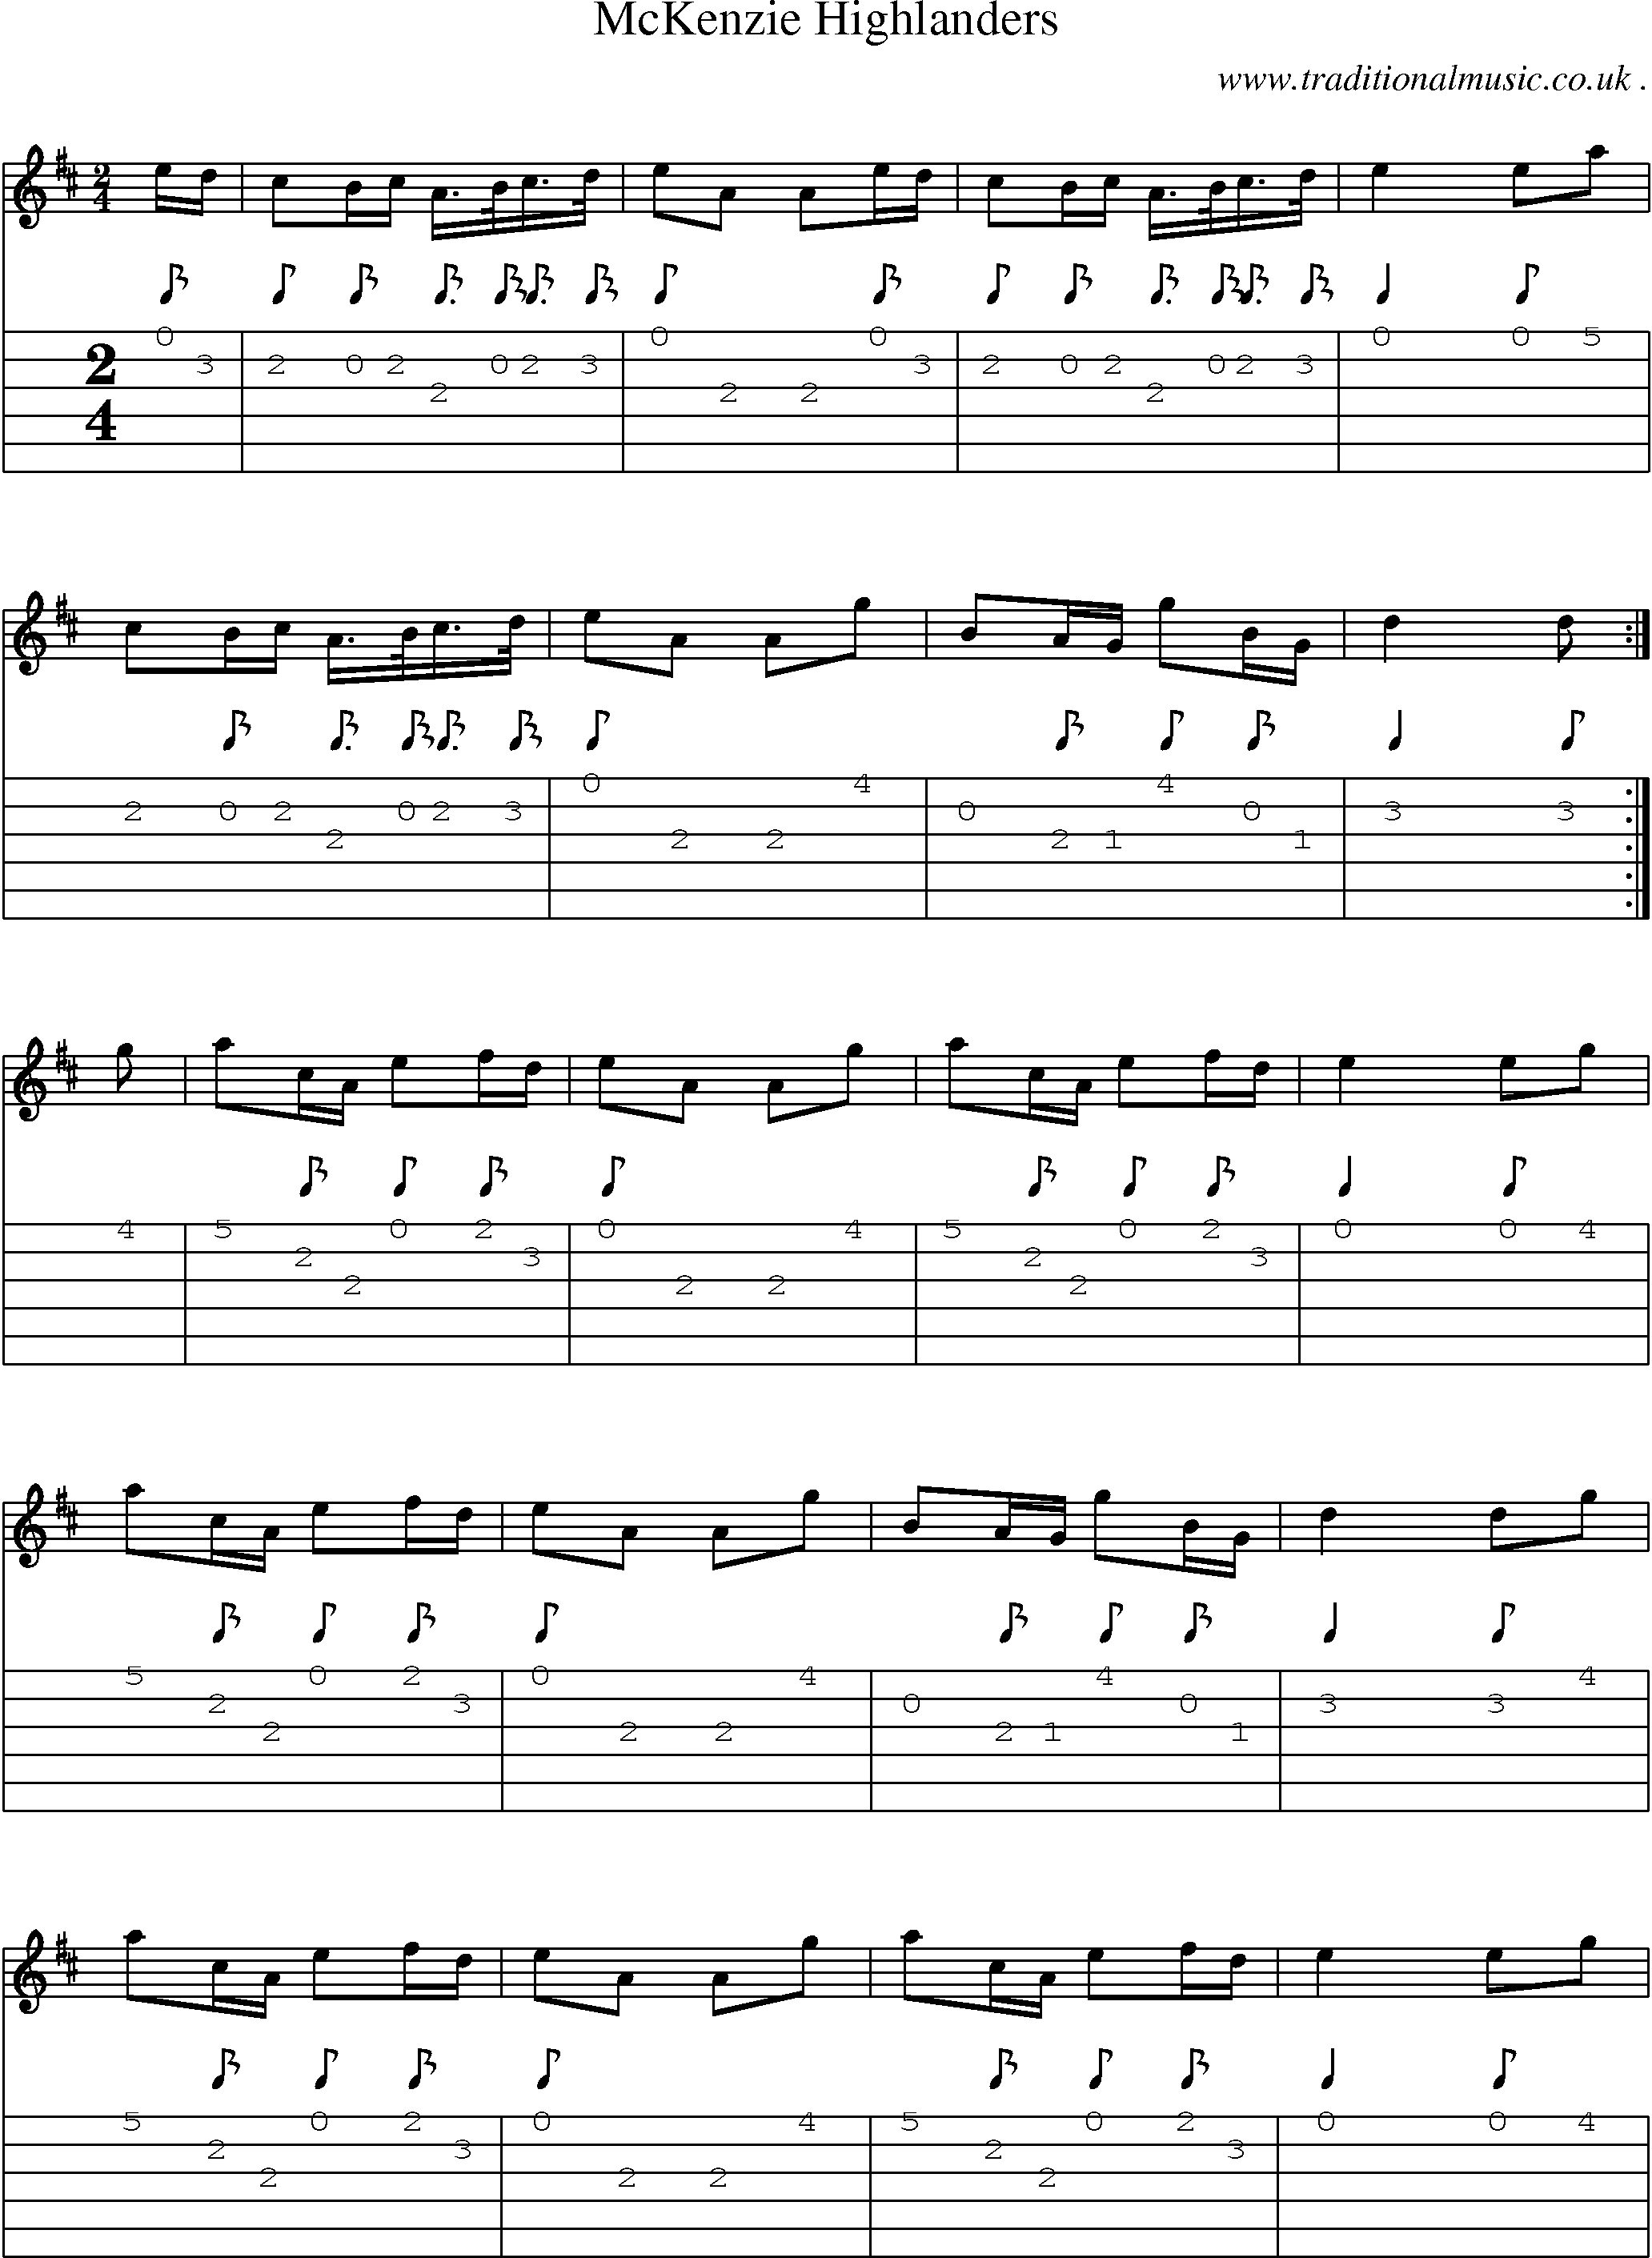 Sheet-music  score, Chords and Guitar Tabs for Mckenzie Highlanders